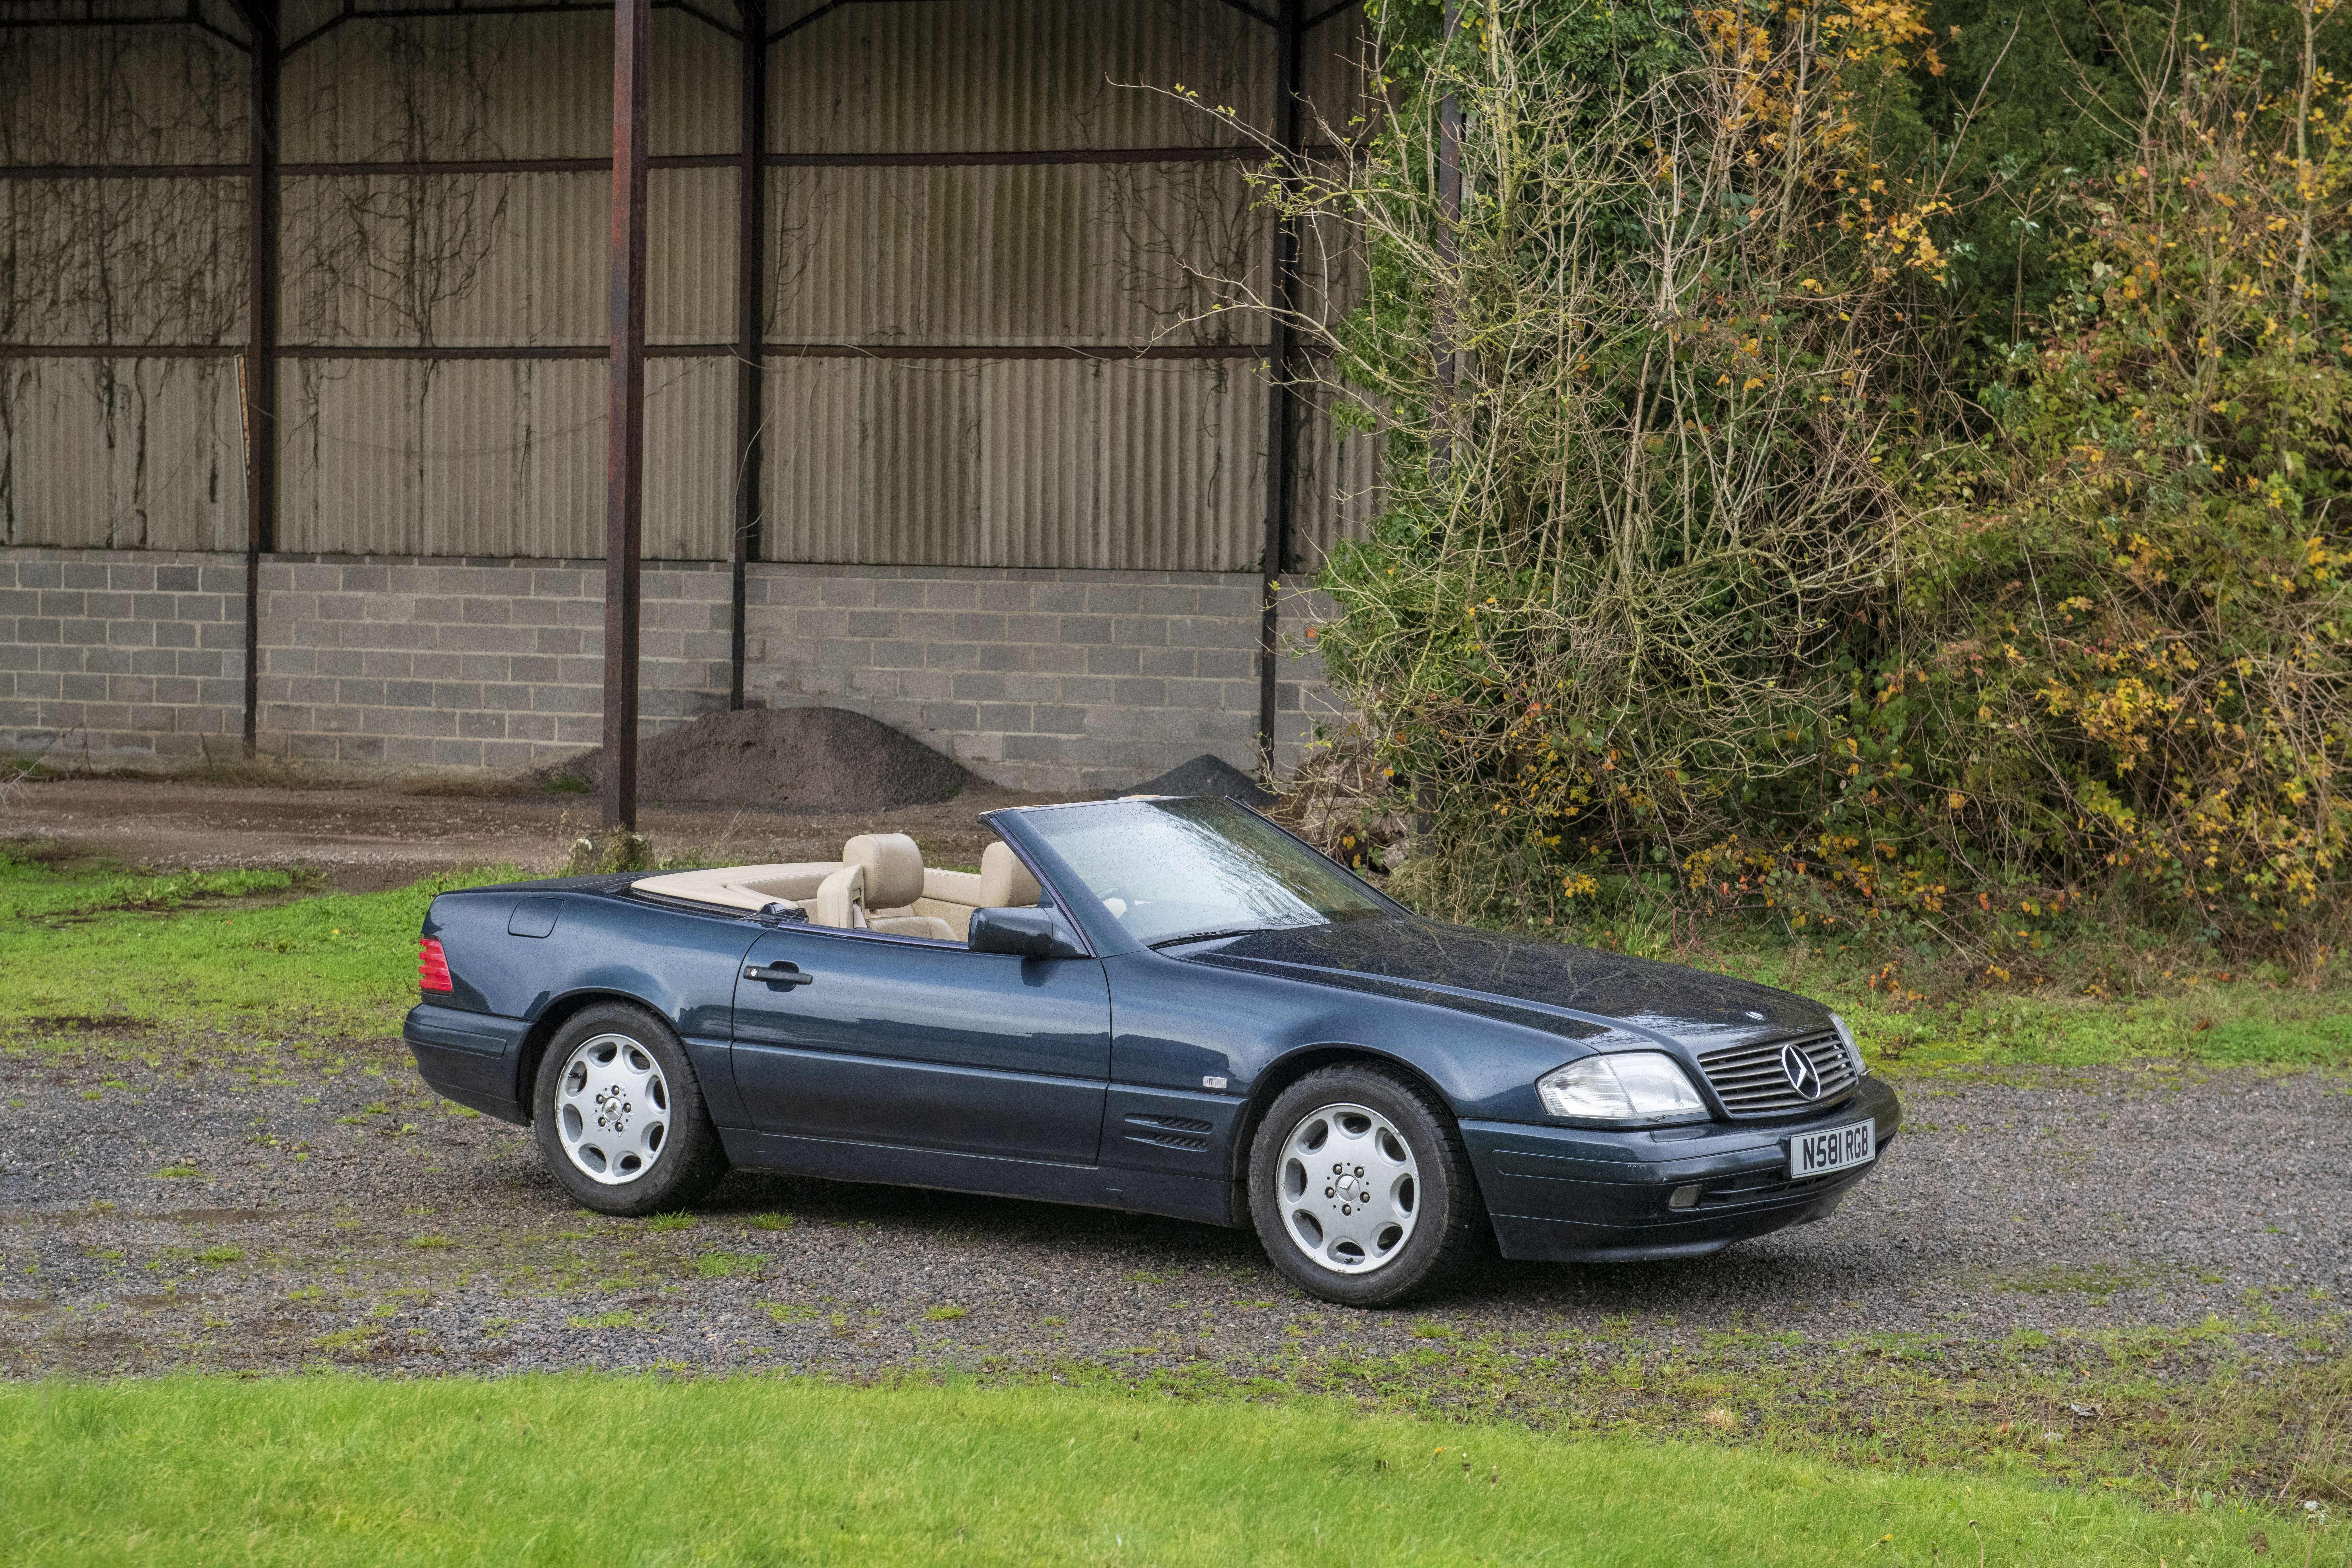 1996 Mercedes-Benz SL500 Convertible with Hardtop Chassis no. WDB1290672F140454